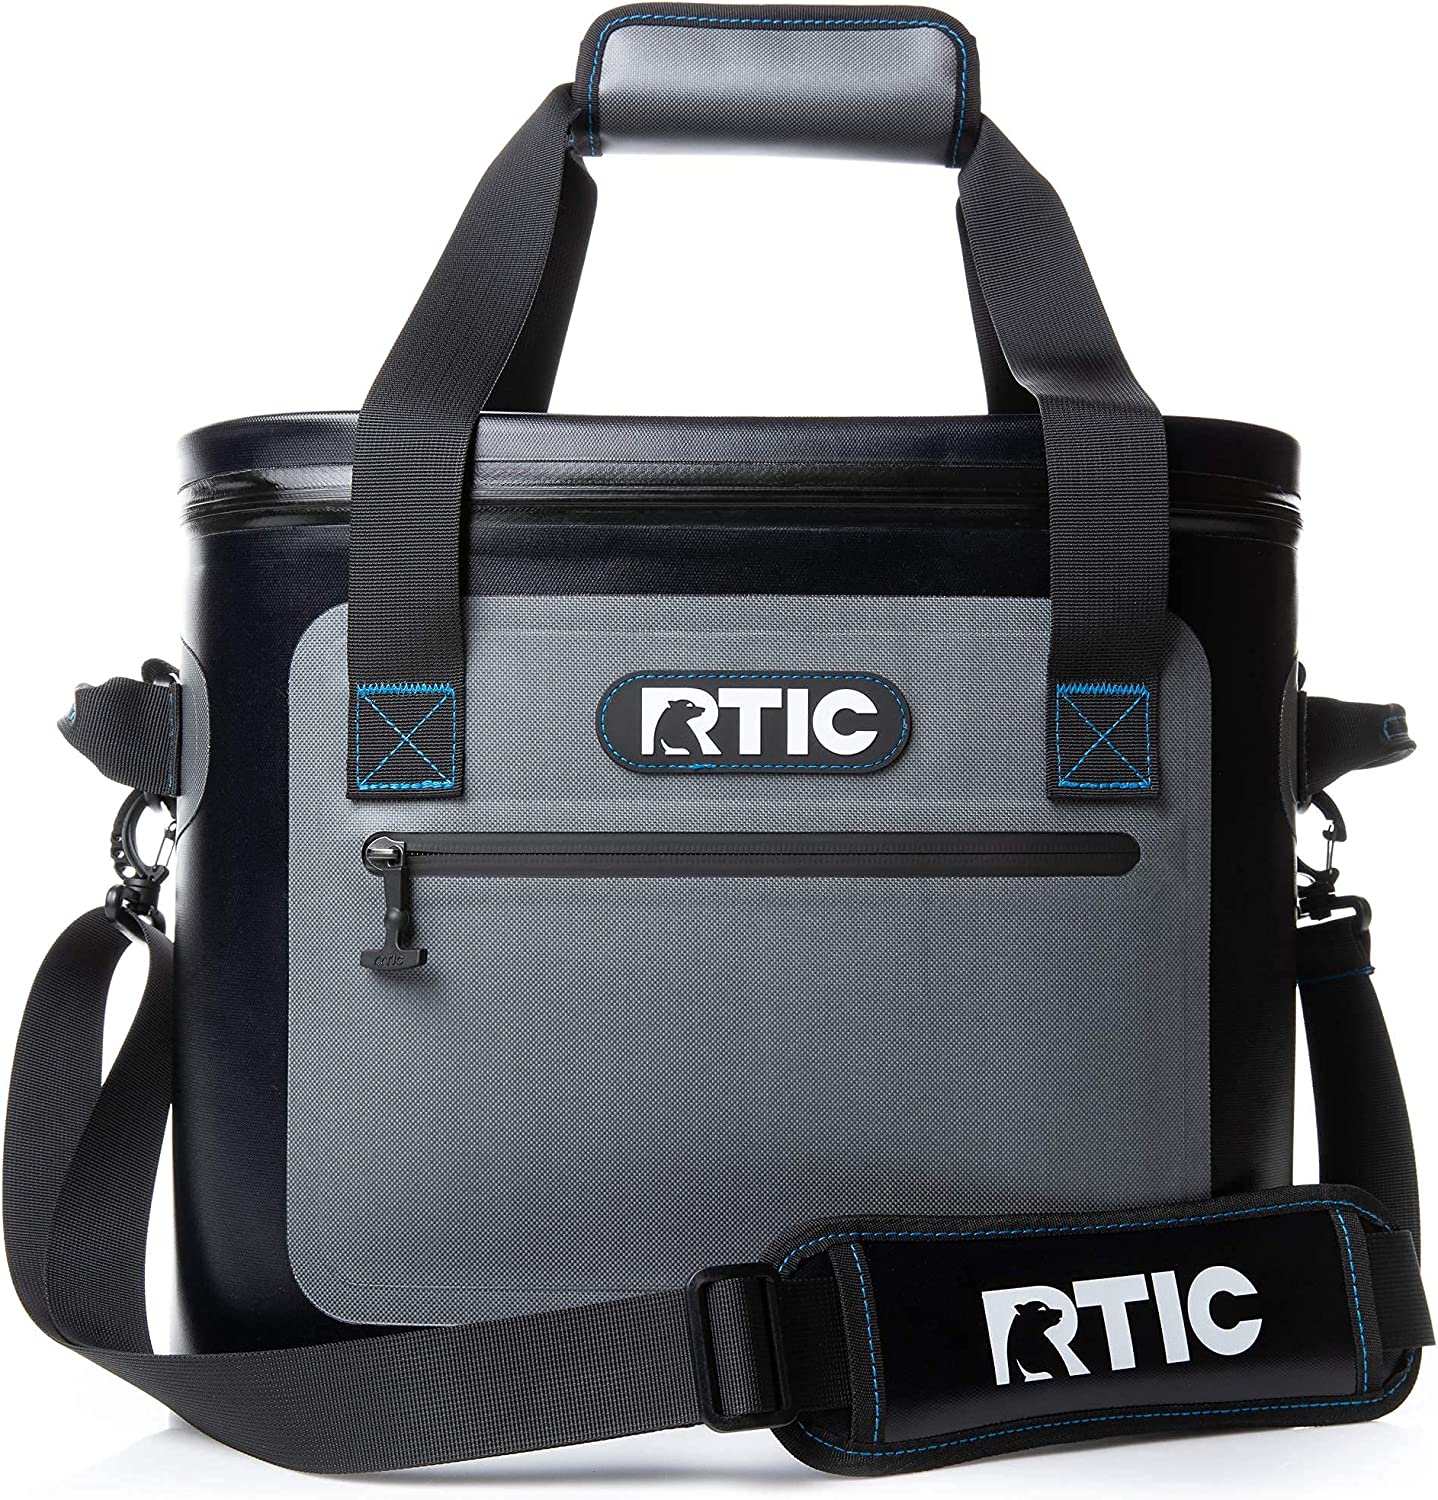 RTIC Soft Cooler 12 Can, Insulated Bag Portable Ice Chest Box for Lunch,  Beach, Drink, Beverage, Travel, Camping, Picnic, Car, Trips, Floating  Cooler